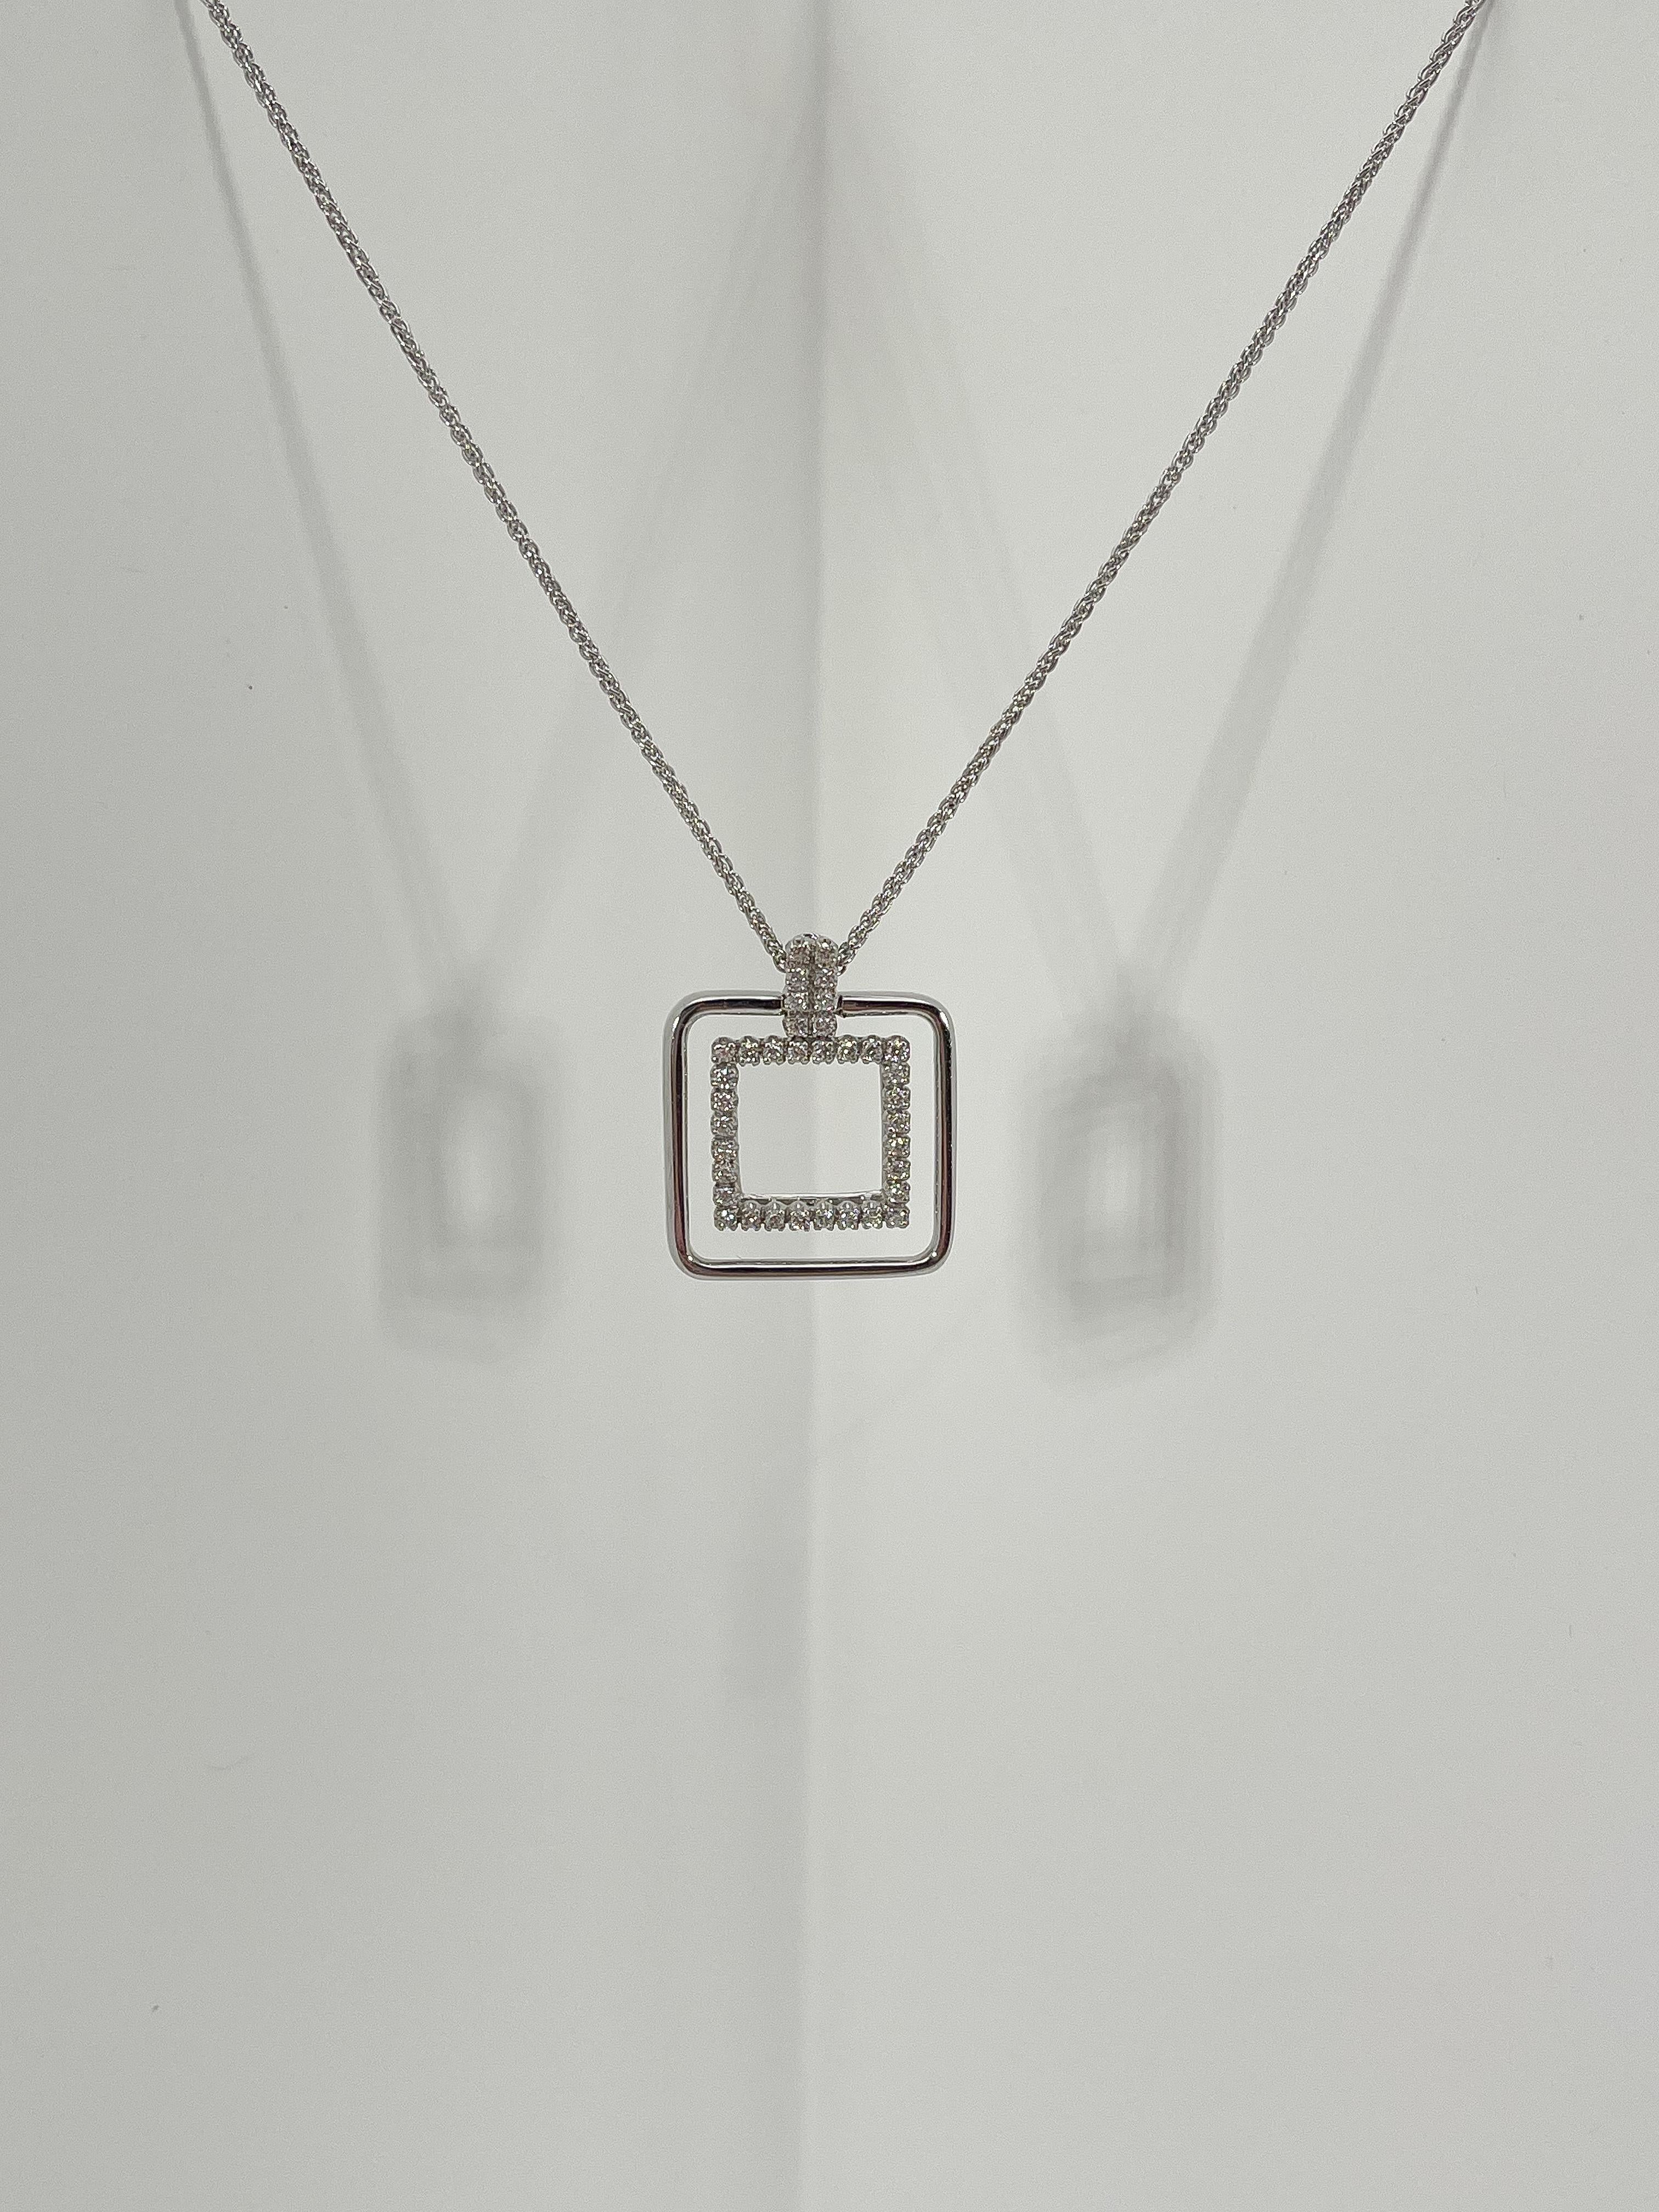 18k white gold square .33 CTW diamond pendant necklace. The diamonds in the pendant are all round, the length of the necklace is 16 inches, the pendant measures to be 17.5mm x 17.5mm for the outside square, 11.5mm x 11.5 mm for the diamond square,